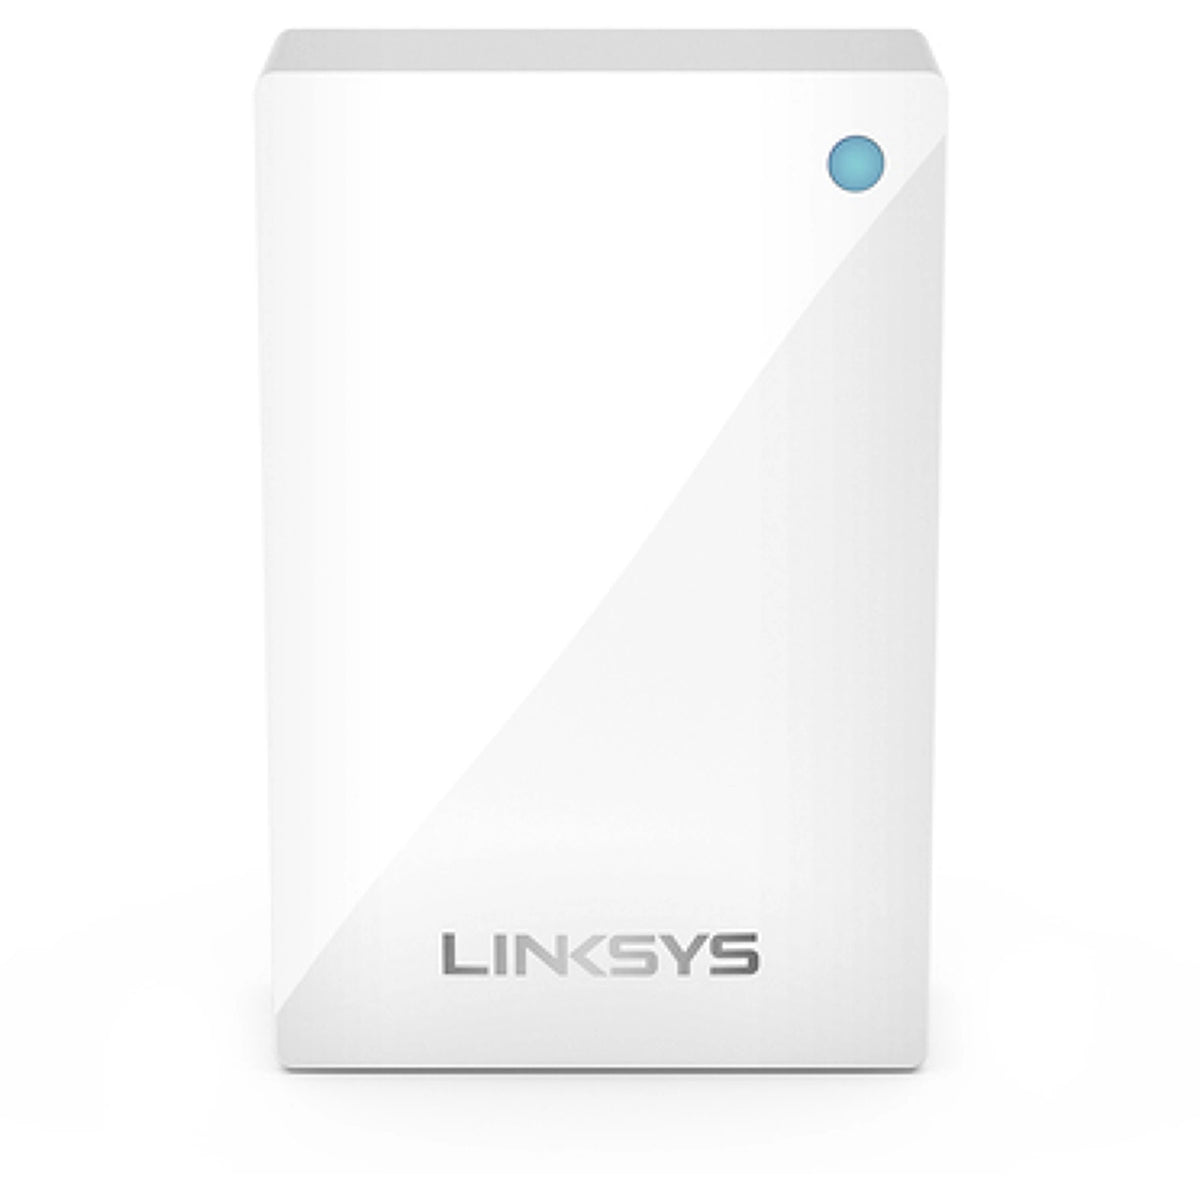 Linksys VELOP Whole Home Intelligent Mesh WHW0101P - Wi-Fi System (Extender) - up to 1500 square feet - Network - 802.11a/b/g/n/ac - Dual Band - Plug-in Module